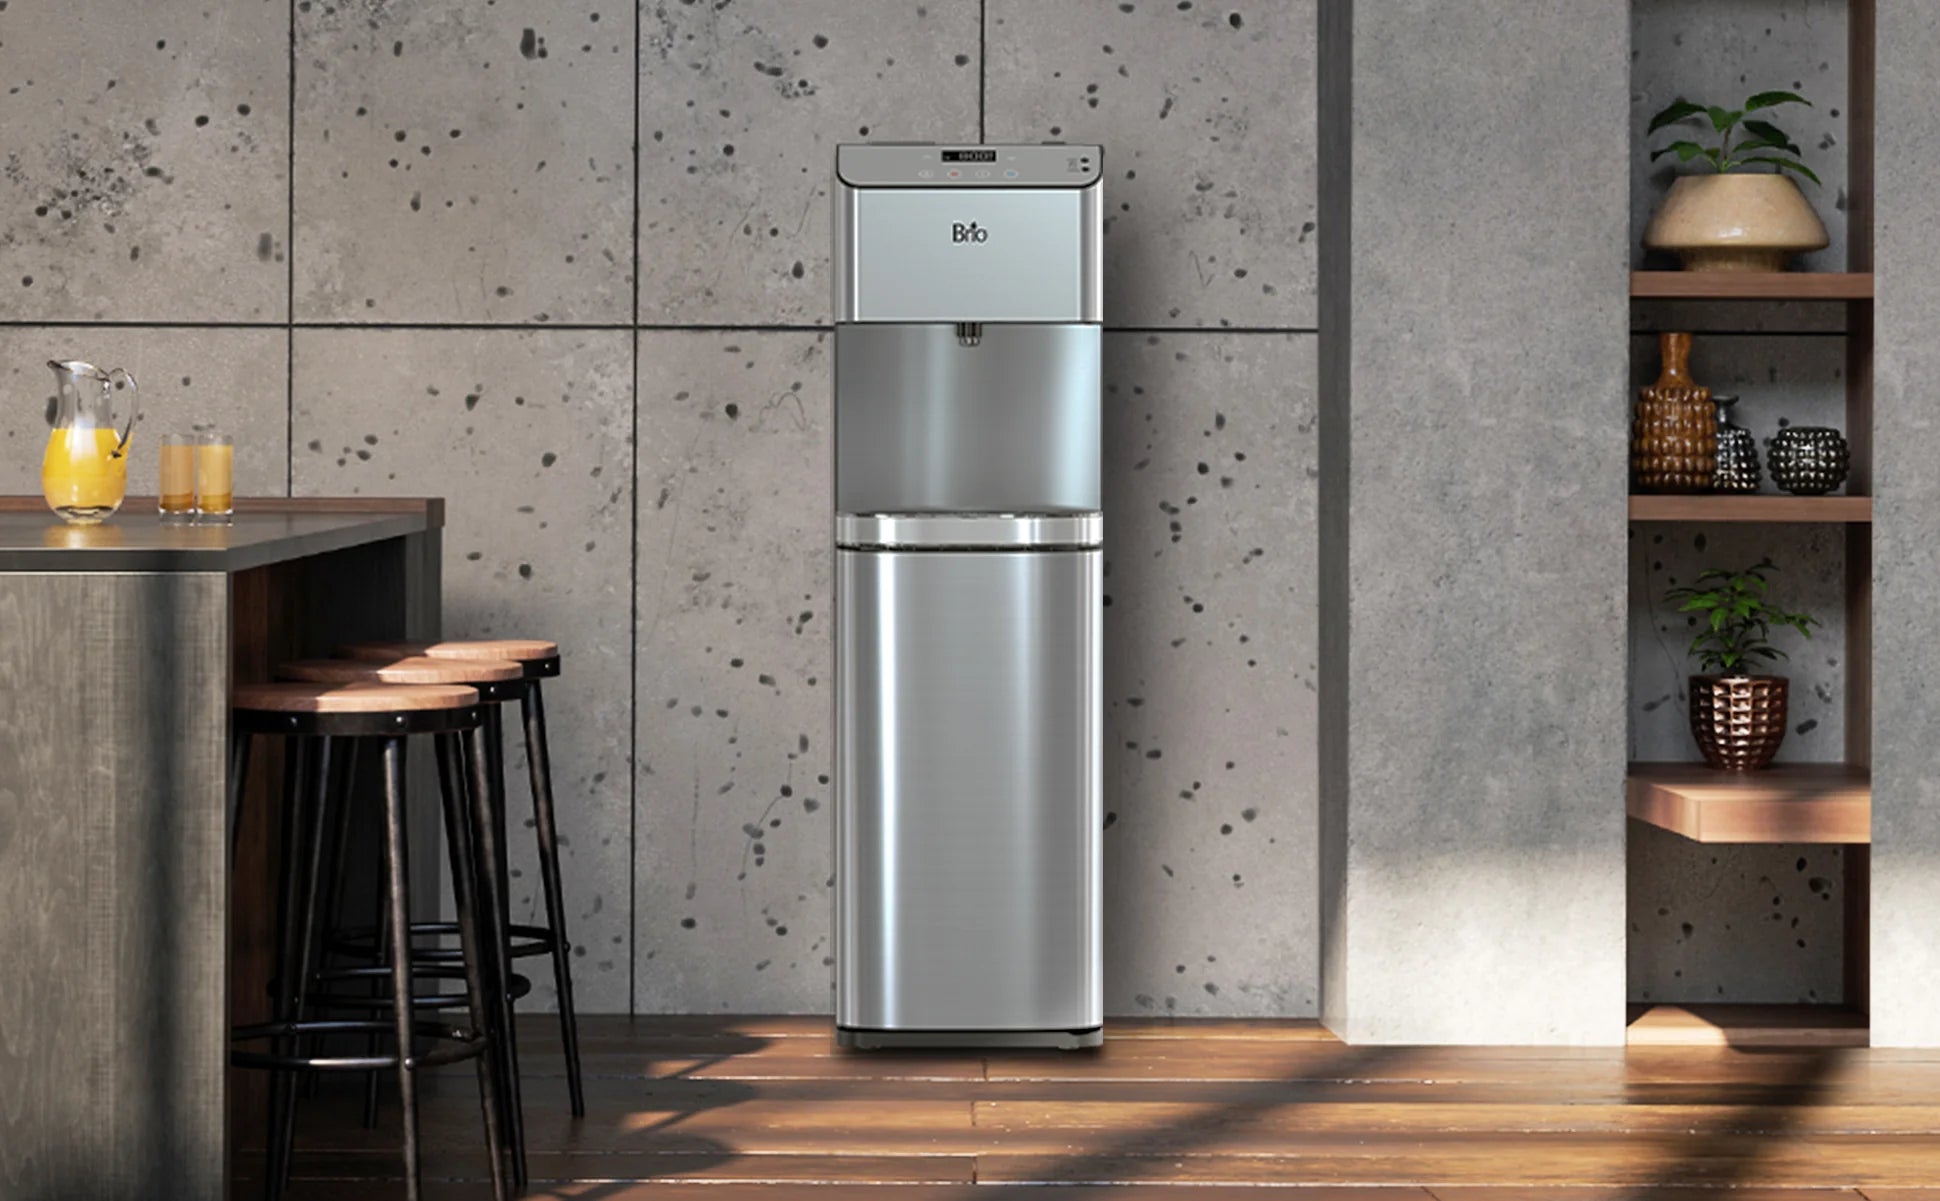 Healthy Living with the Moderna Touchless Water Cooler